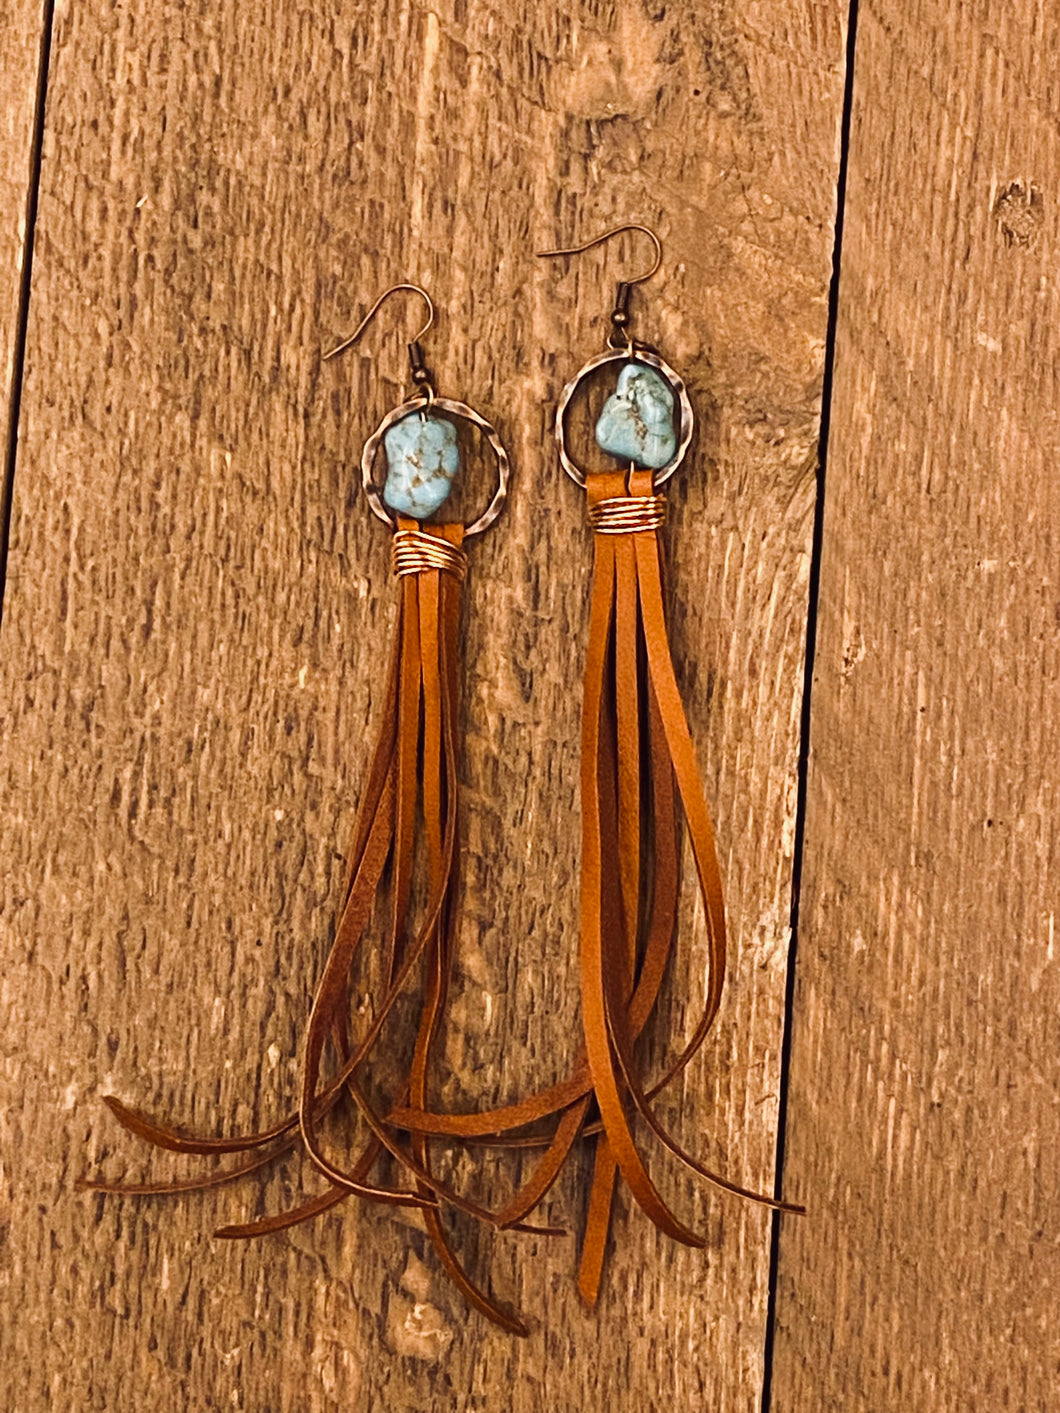 Turquoise drop earrings with suede leather tassels